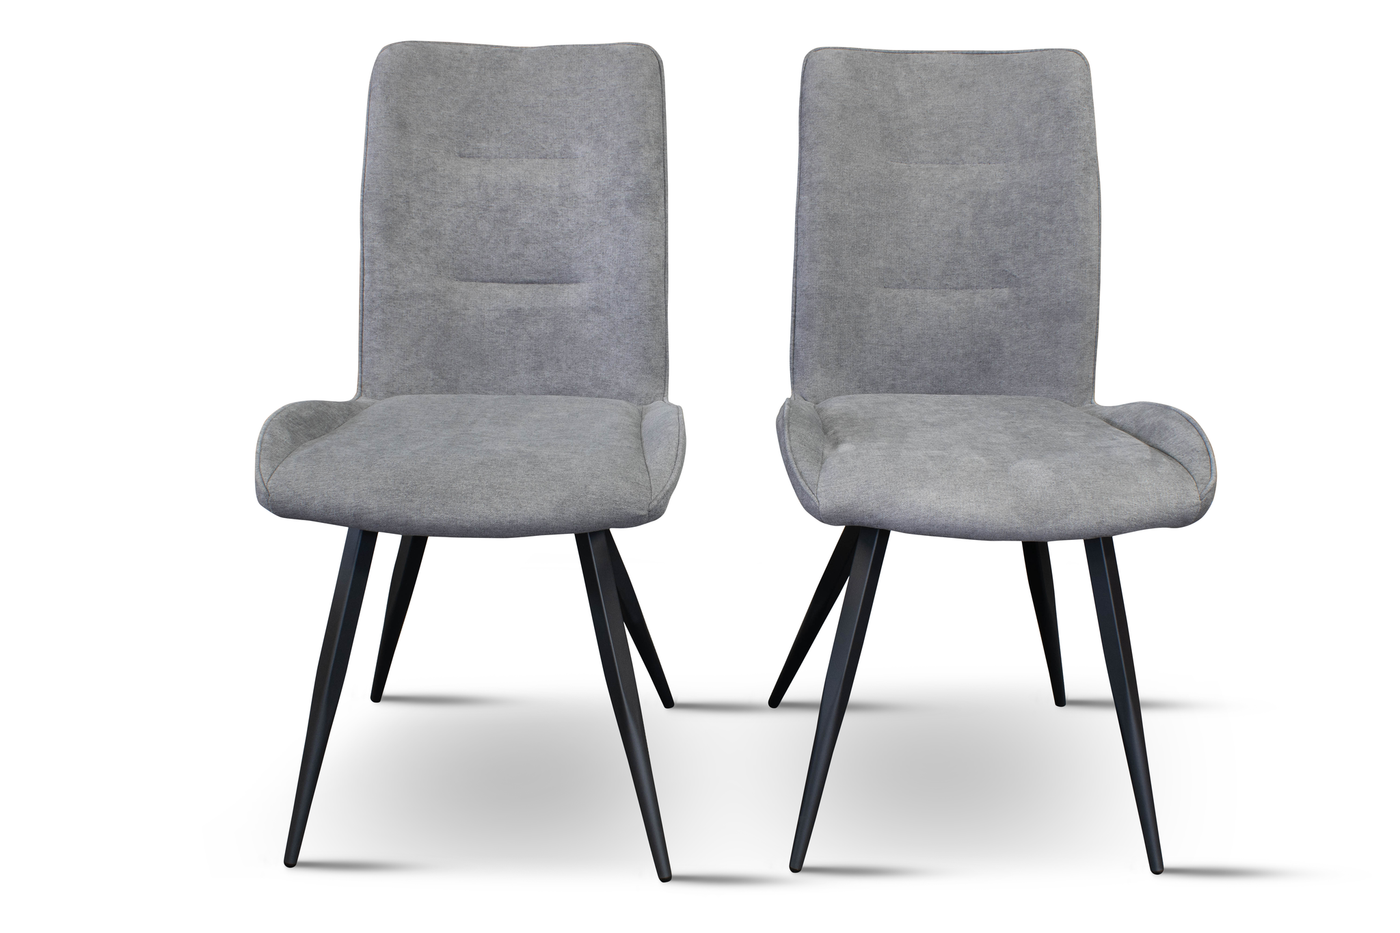 Lana Set of Two Dining Chairs (Grey Polyester) (7679369478398)